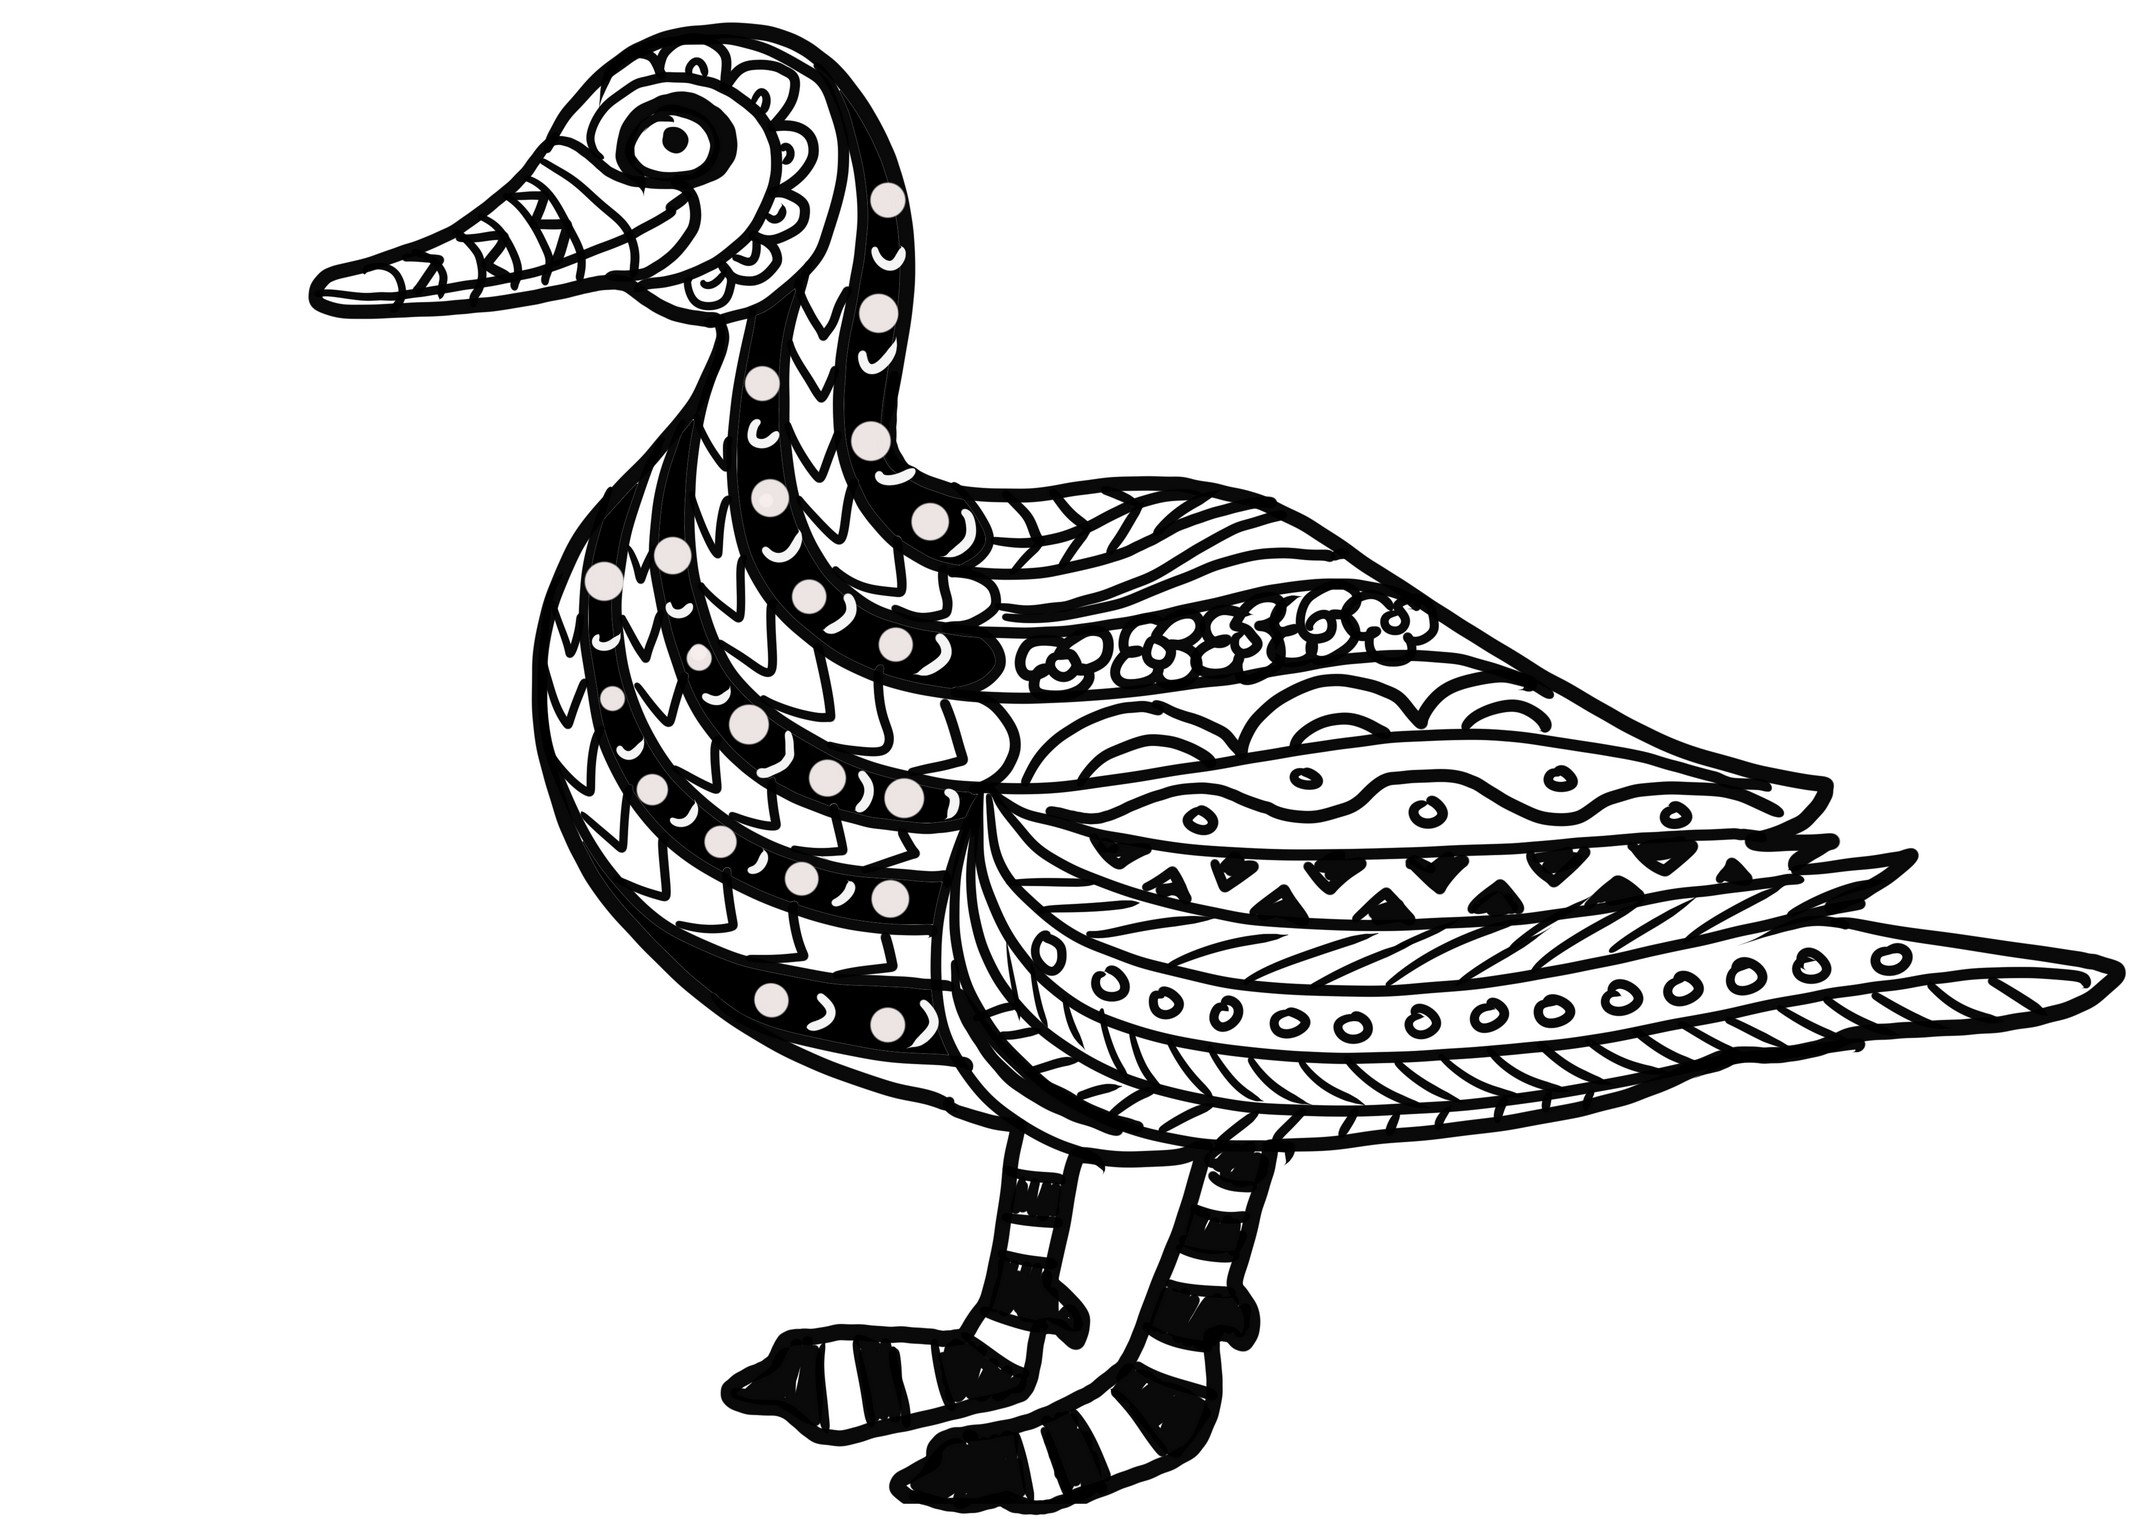 Duck mandala coloring page to print and coloring